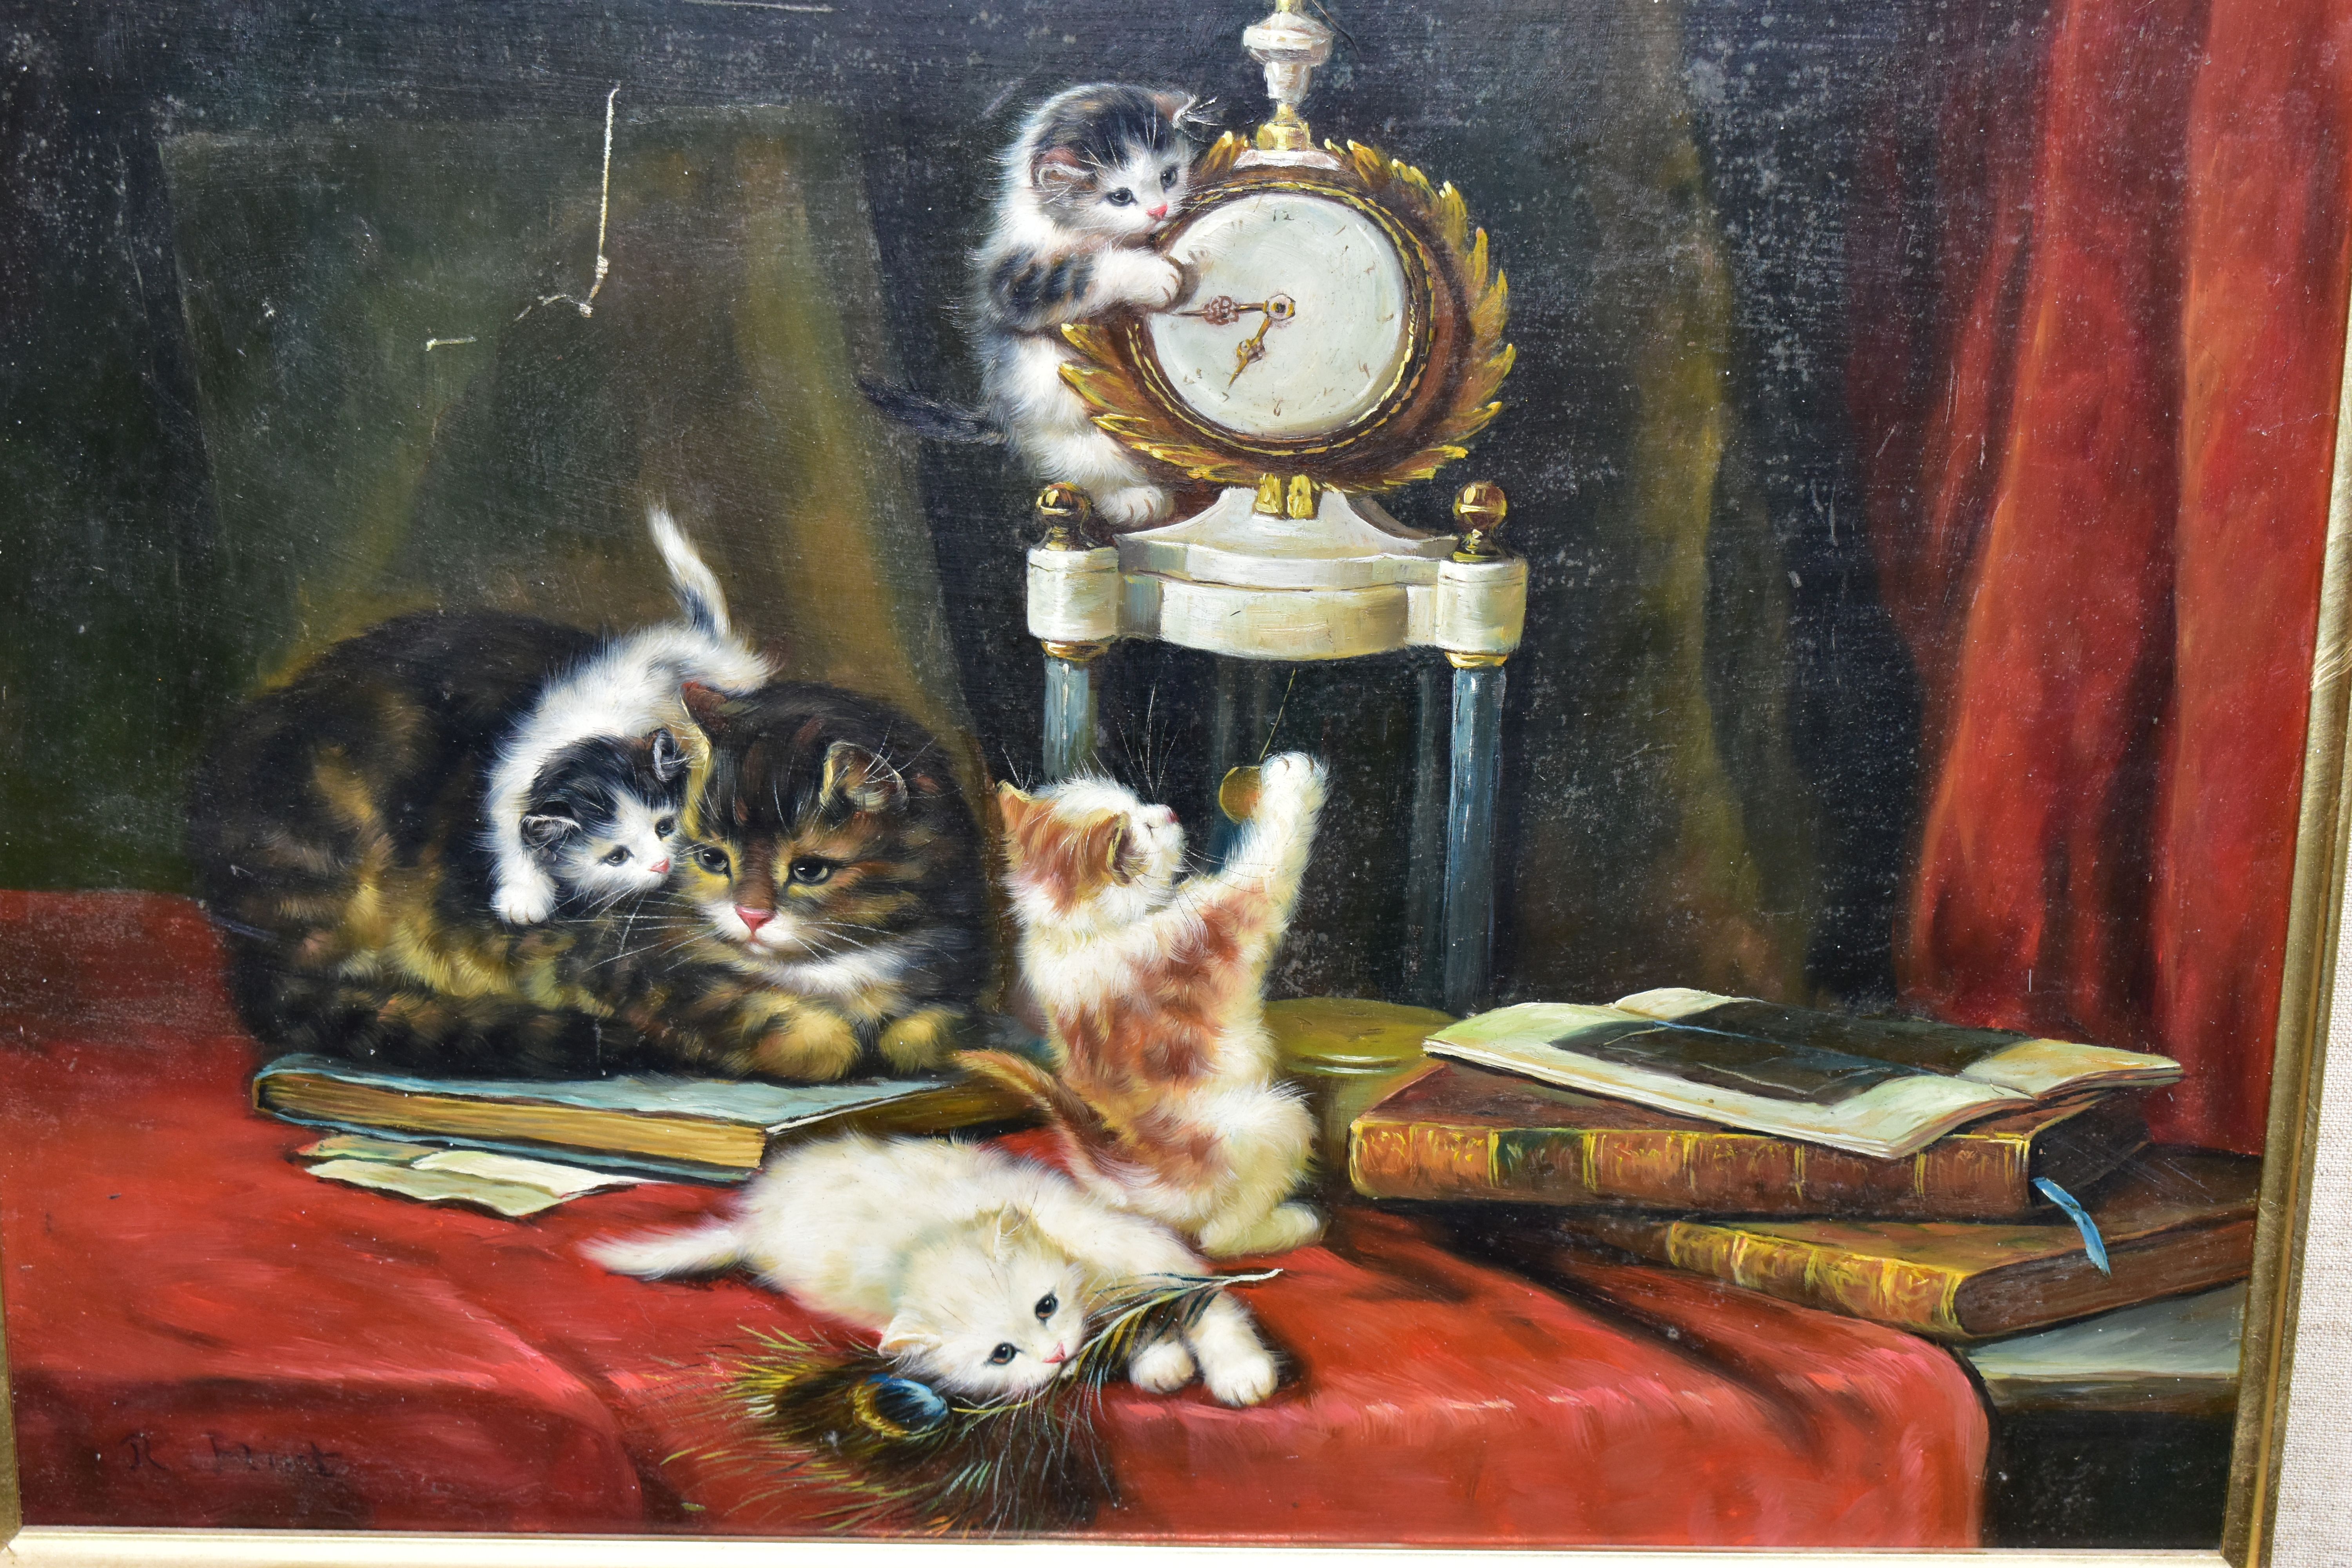 R. FLINT (20TH CENTURY) 'A CAT WITH KITTENS AT PLAY', signed bottom left, oil on wooden panel, - Image 2 of 4